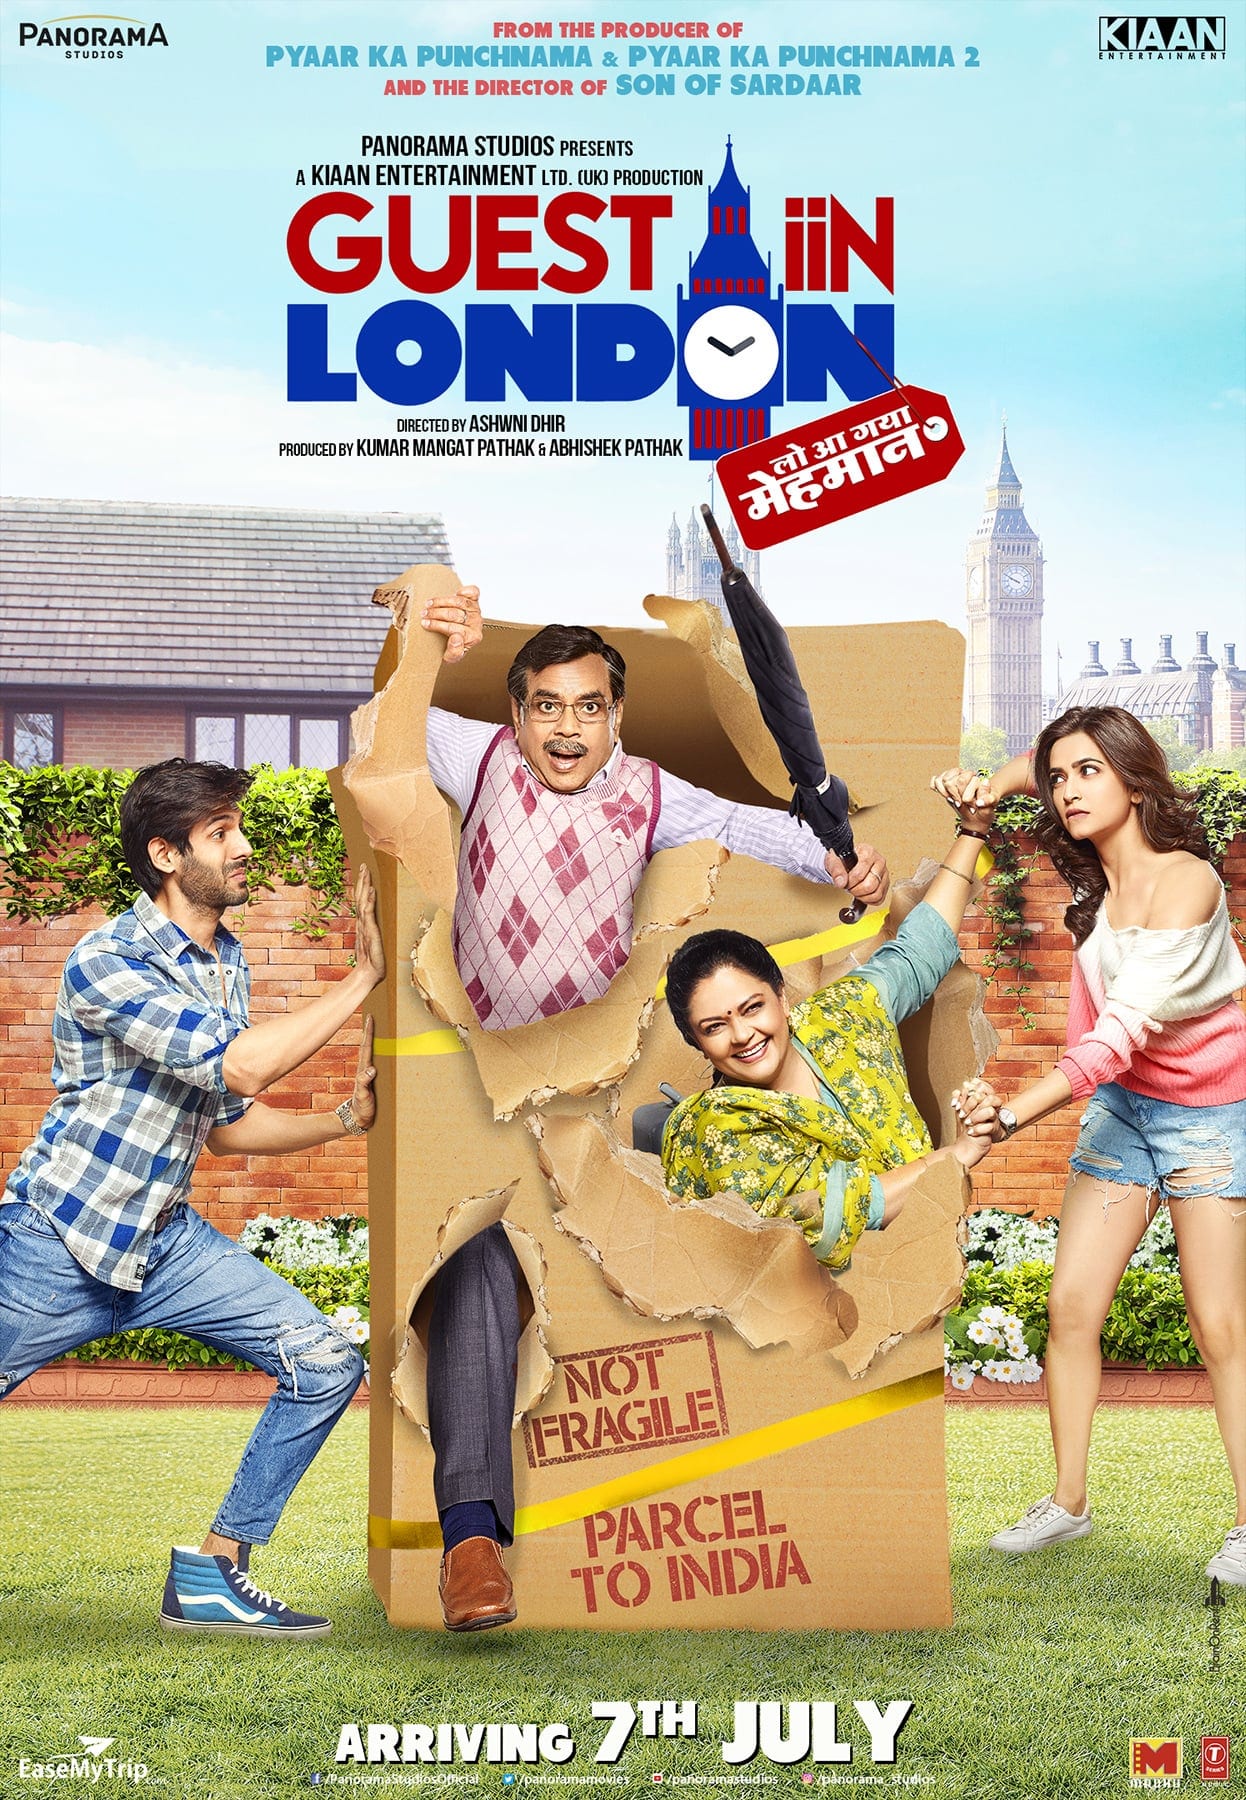 Poster for the movie "Guest iin London"